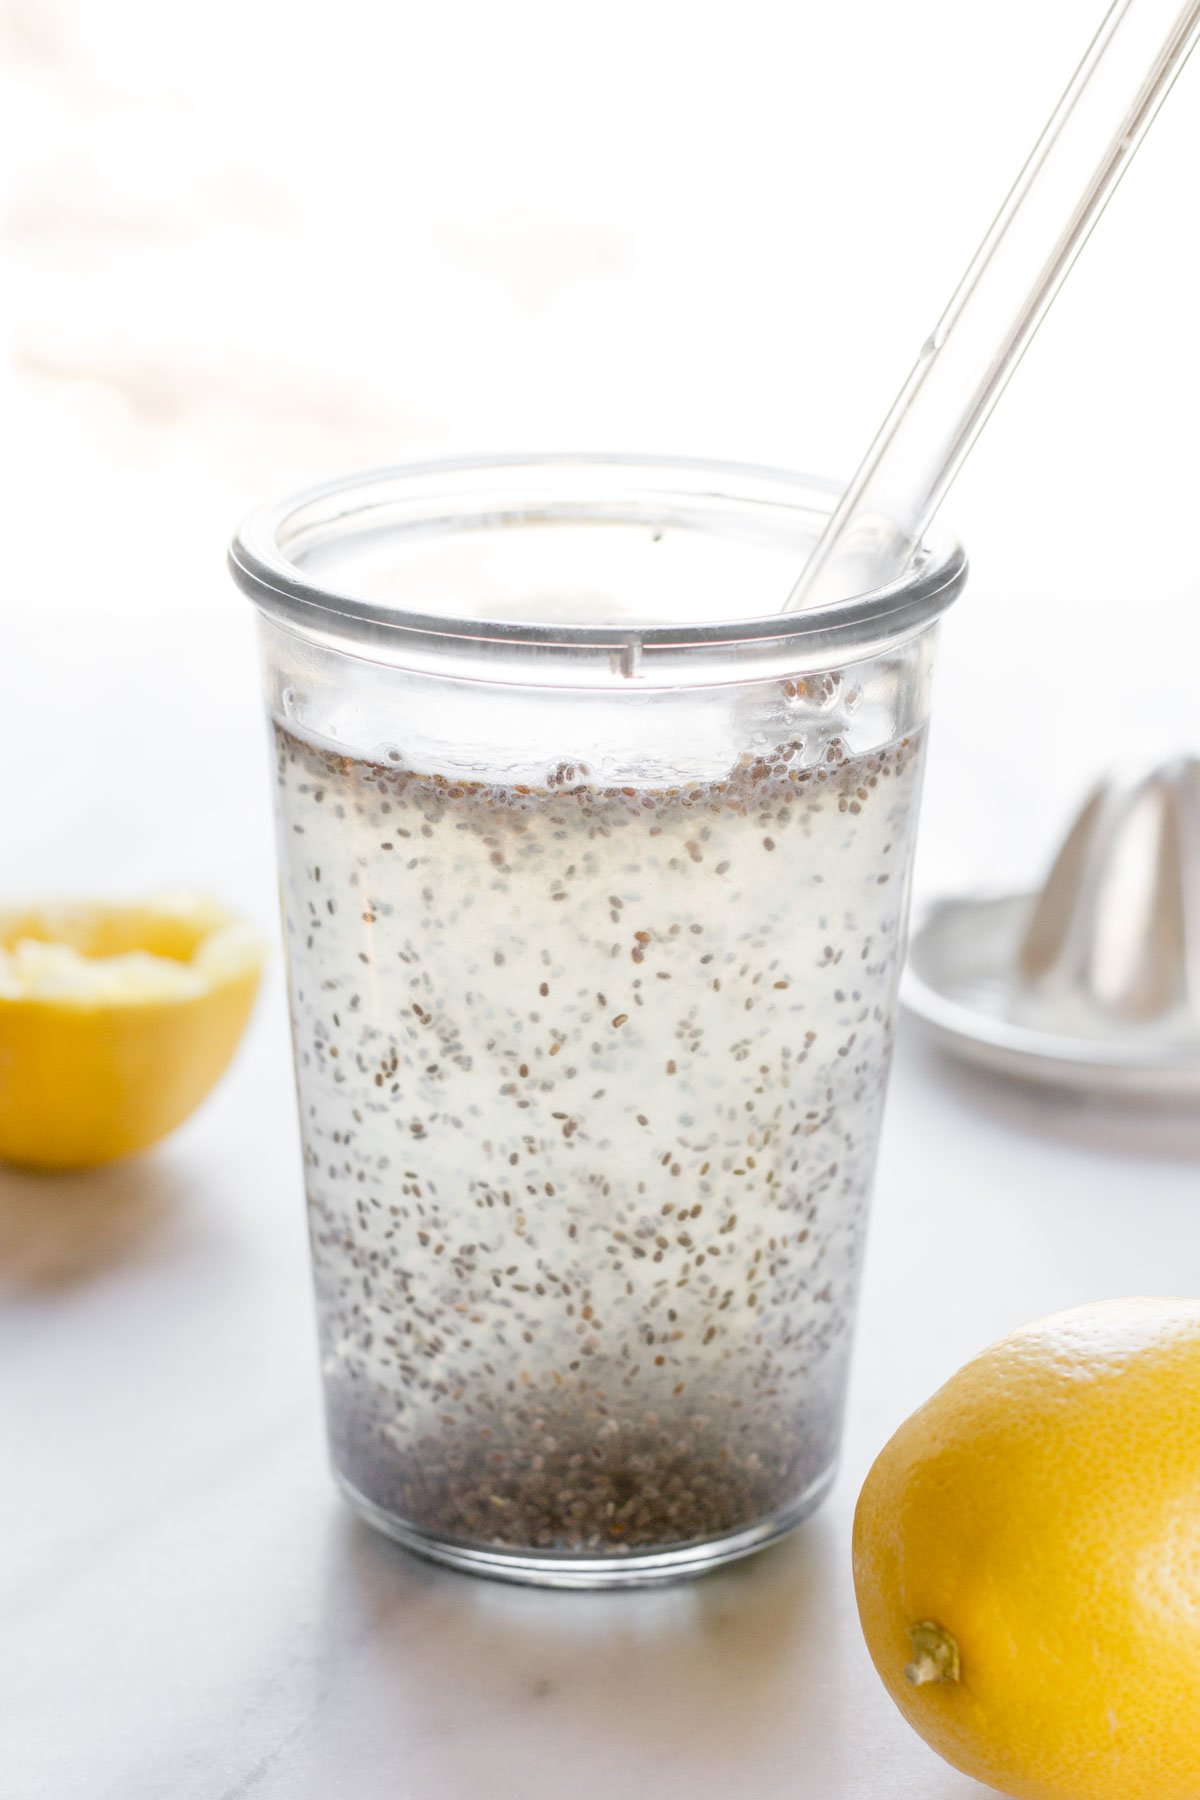 Close-up of glass filled with chia seed drink and glass straw and fresh lemons.